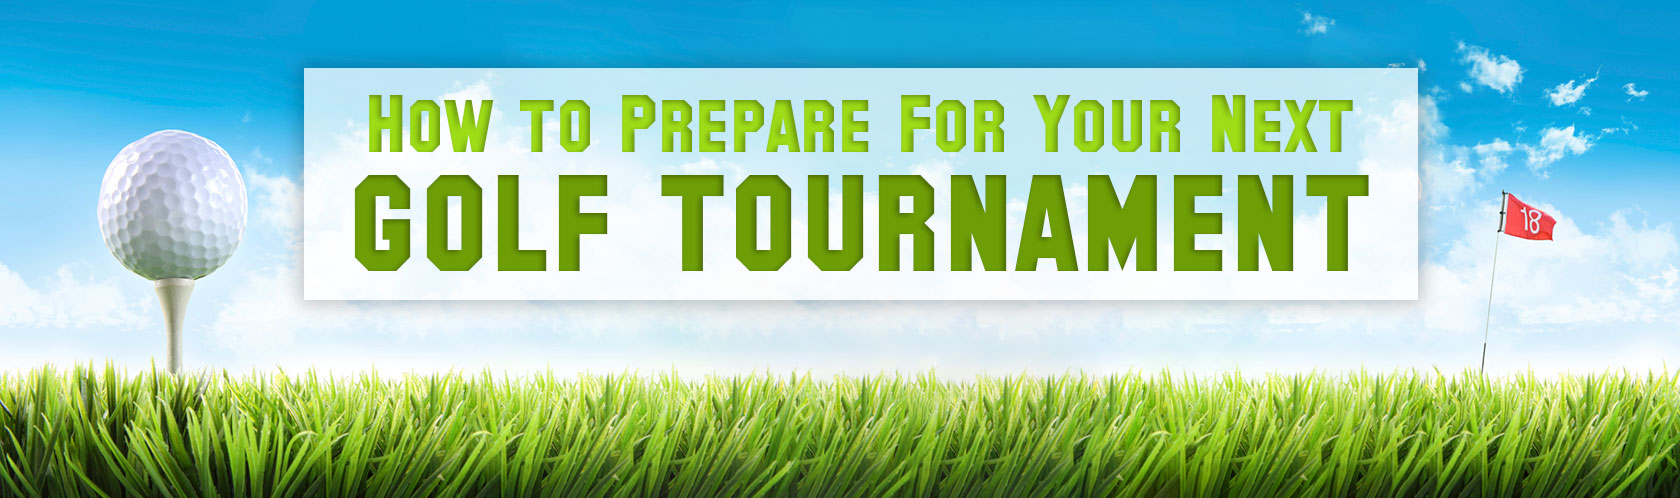 How to Prepare for your Next Golf Tournament